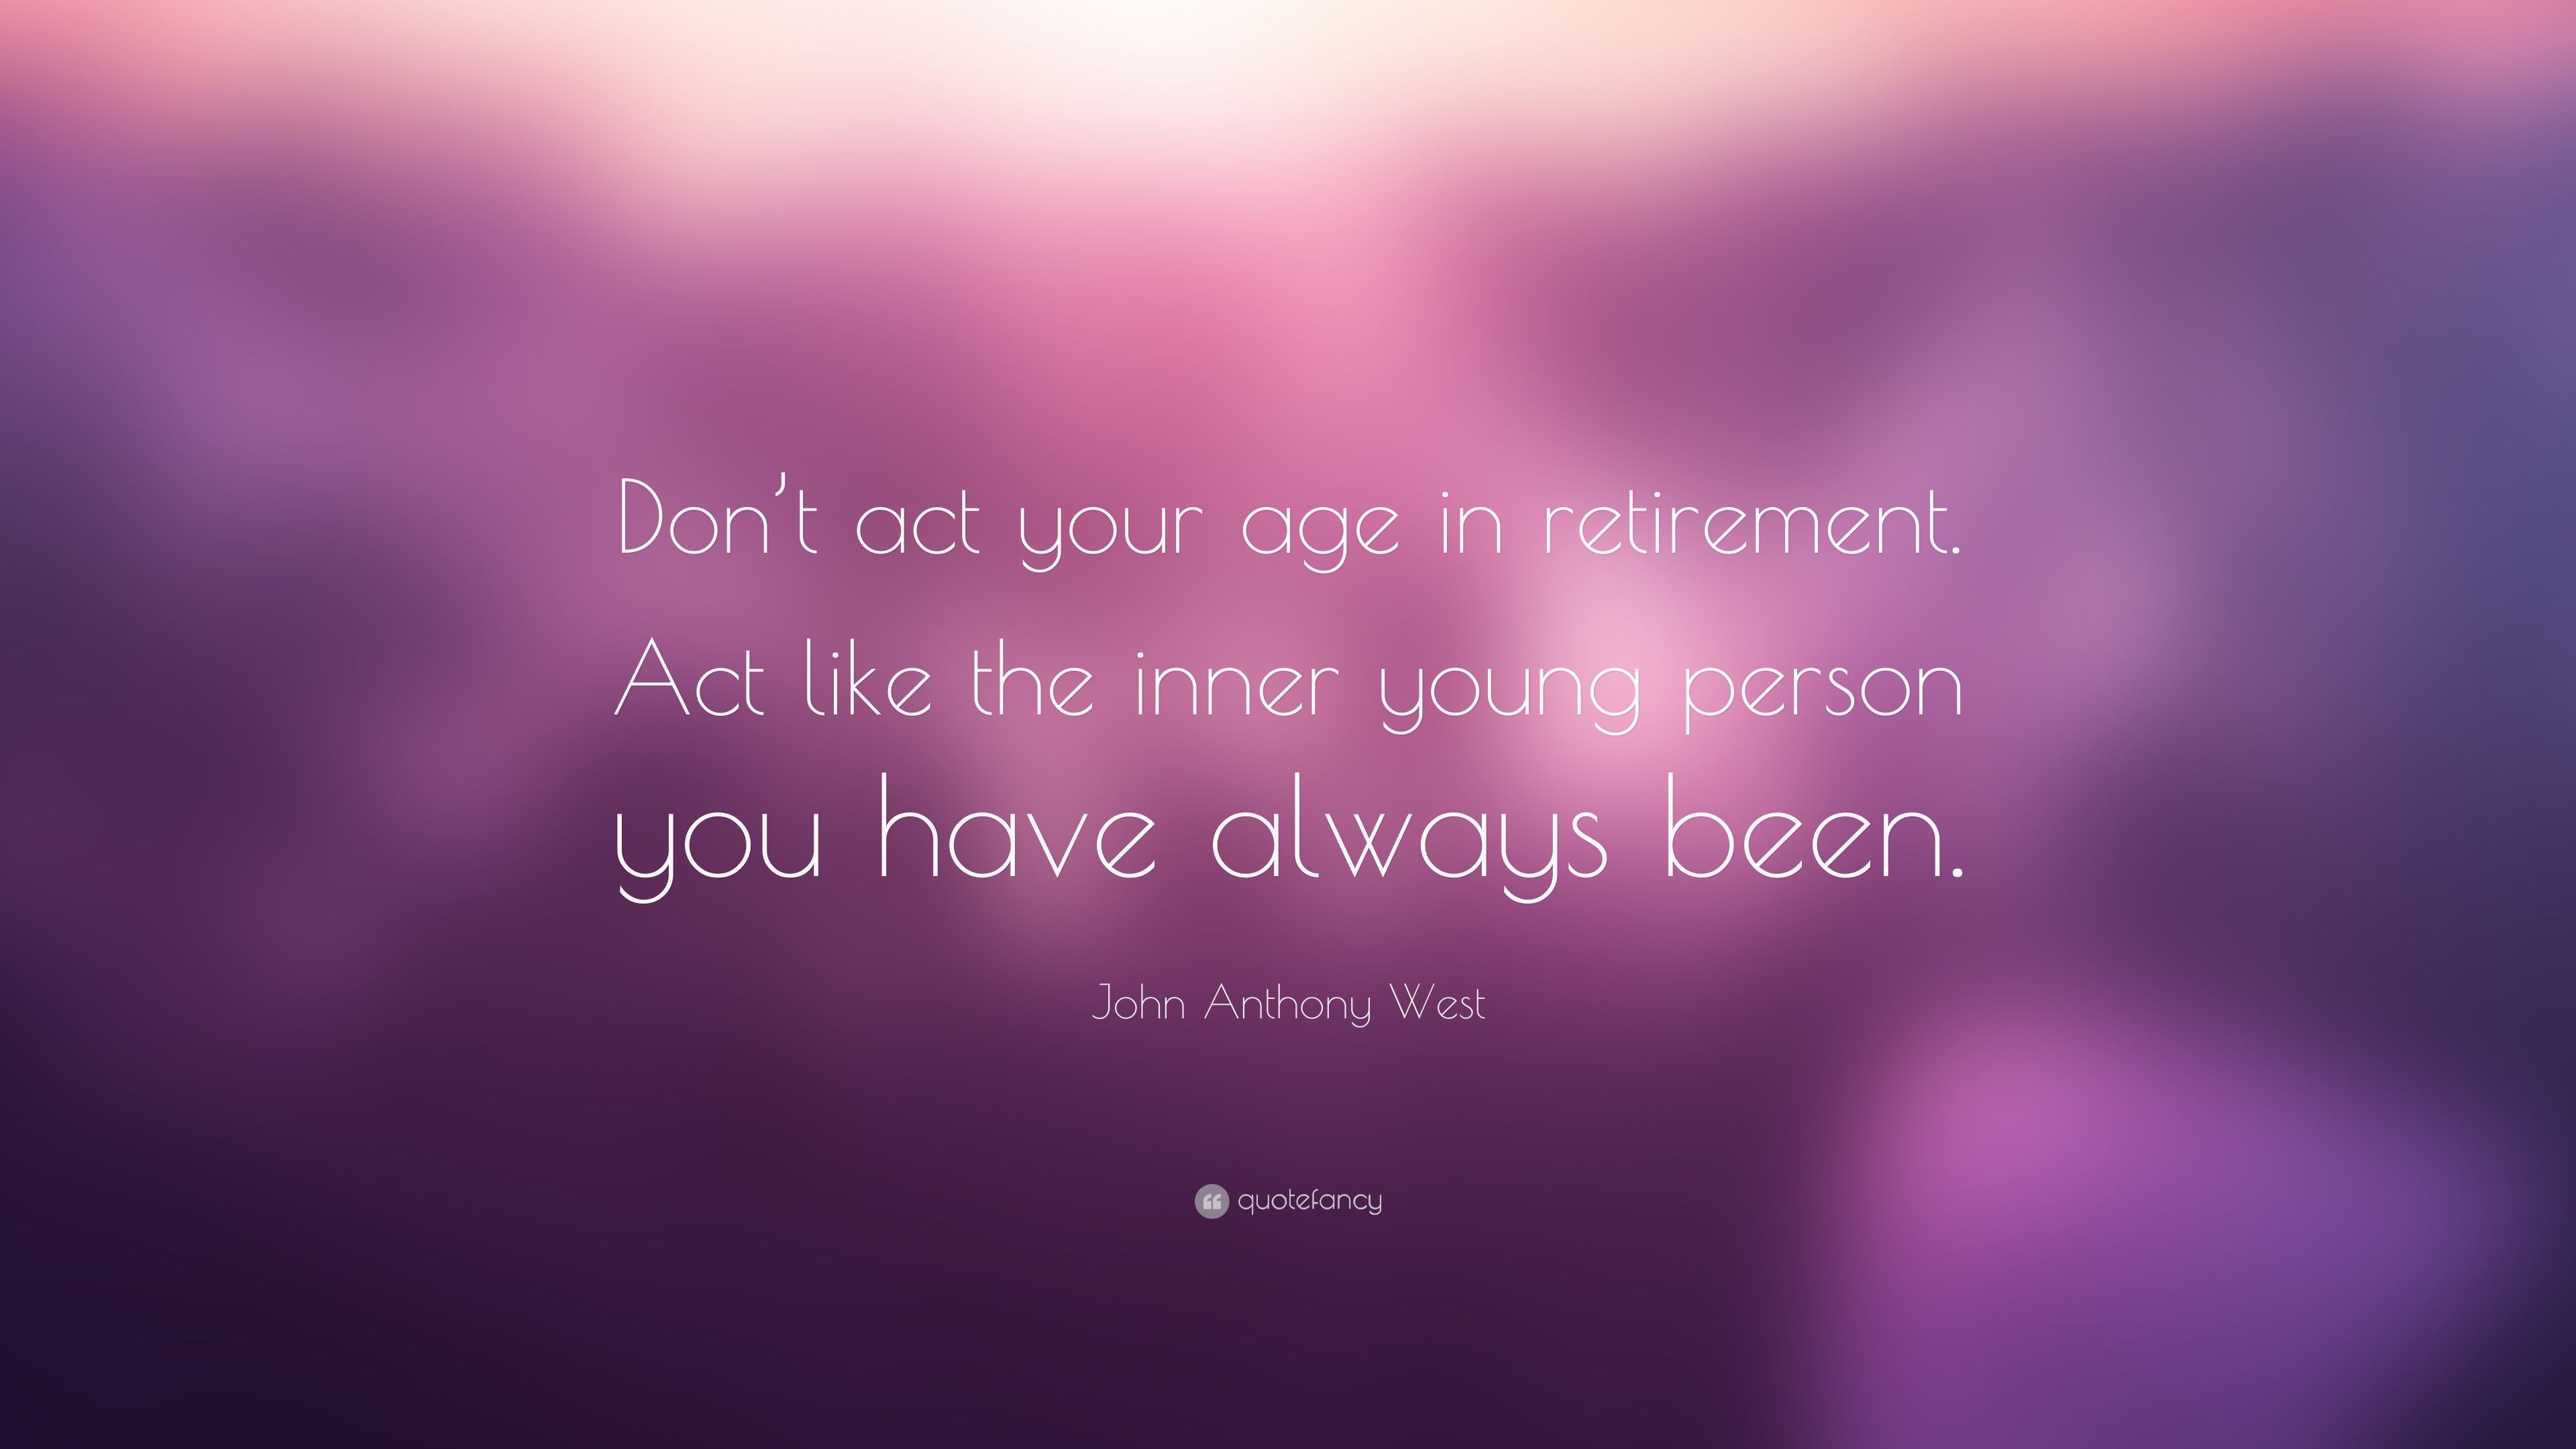 John Anthony West Quote: “Don't act your age in retirement. Act